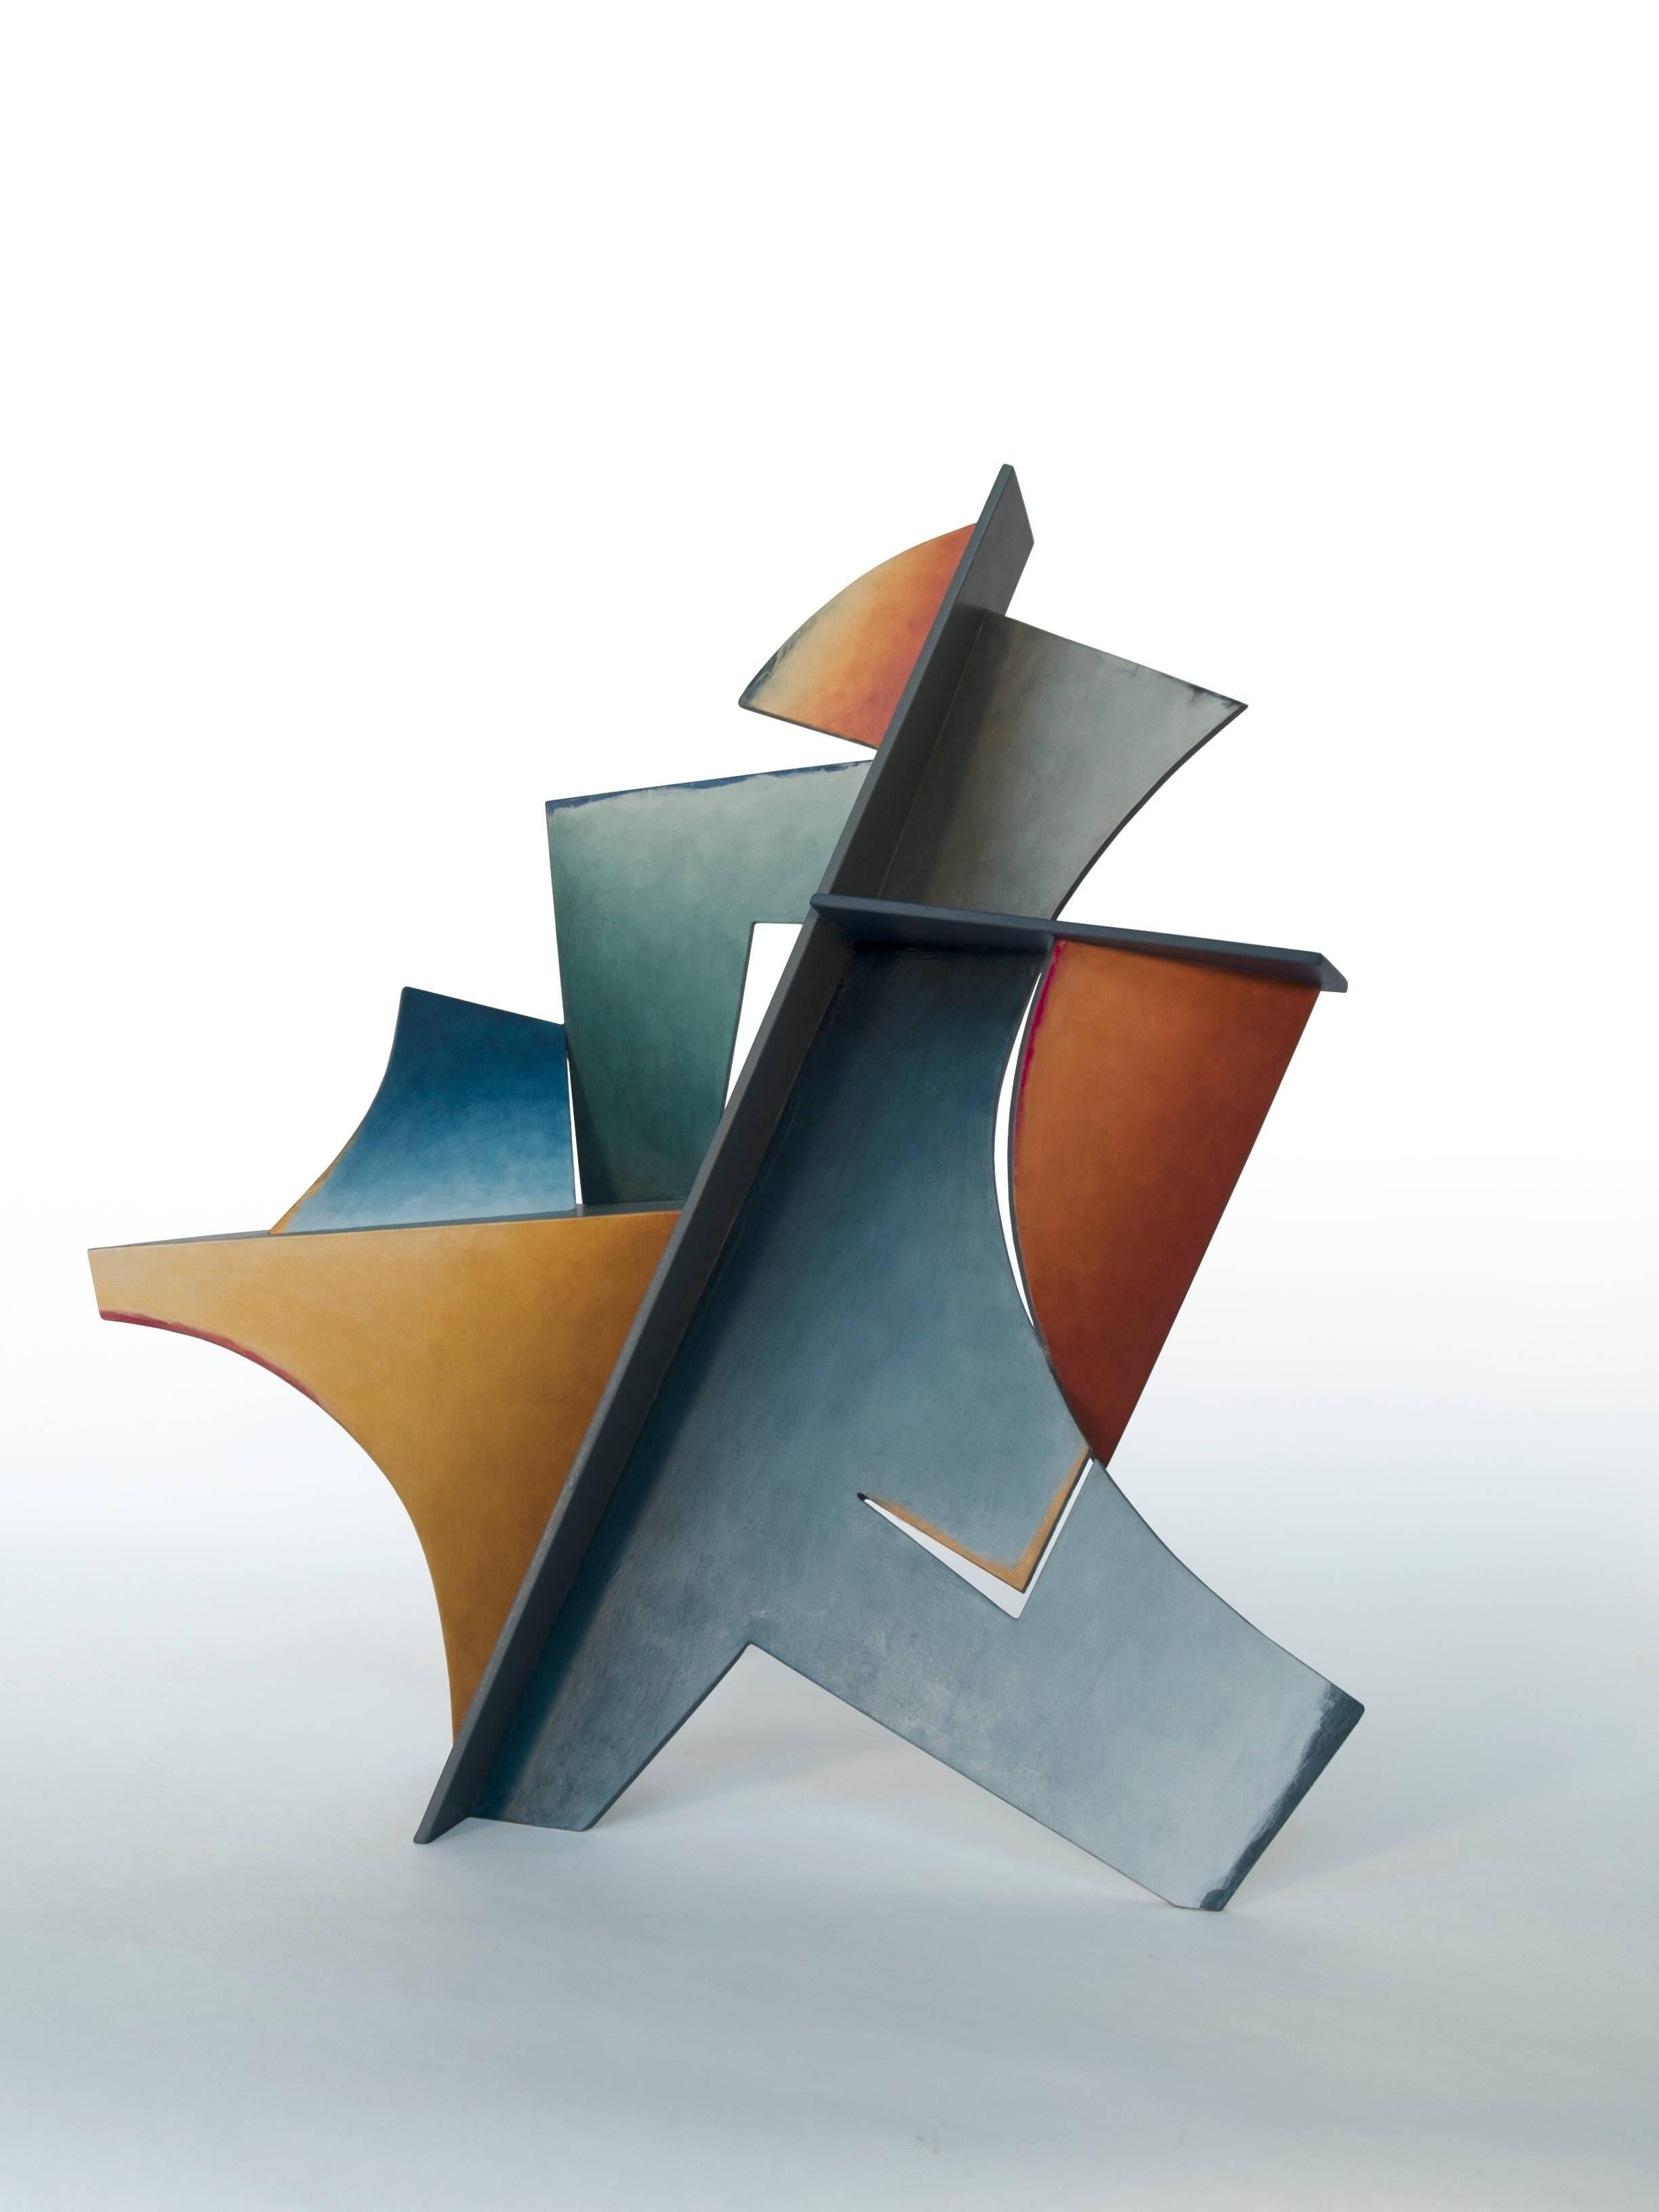 Chris Hill Abstract Sculpture - Nightfall - Hand Painted Welded Steel Sculpture Abstract Geometric Form